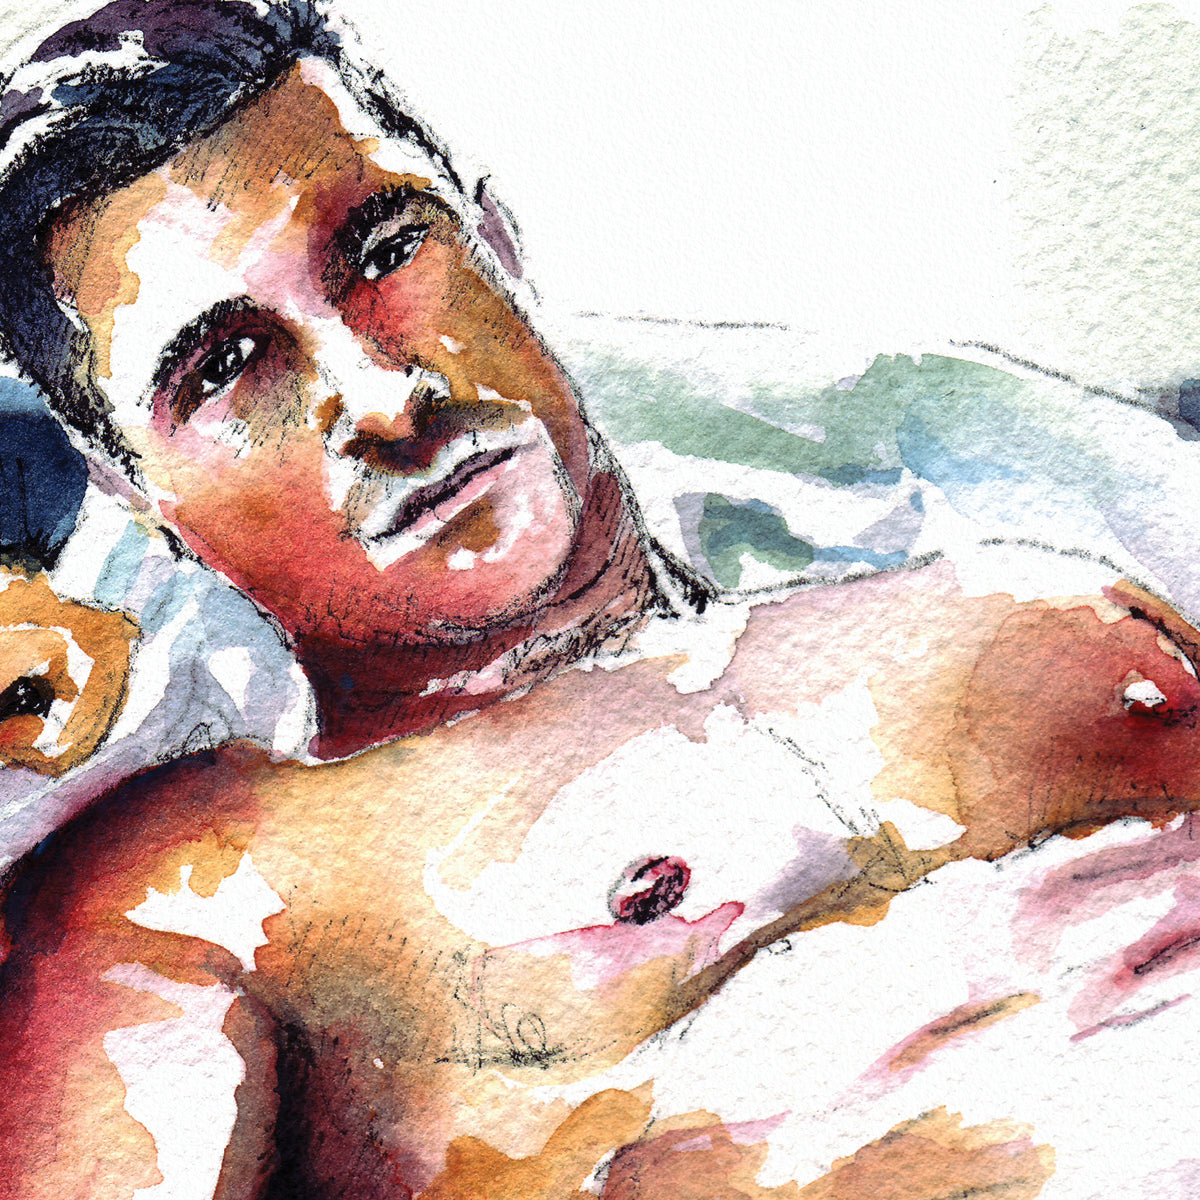 Lazy Sunday: Muscular Man on Porch, Whisper of a Hairy Chest - Giclee Art Print